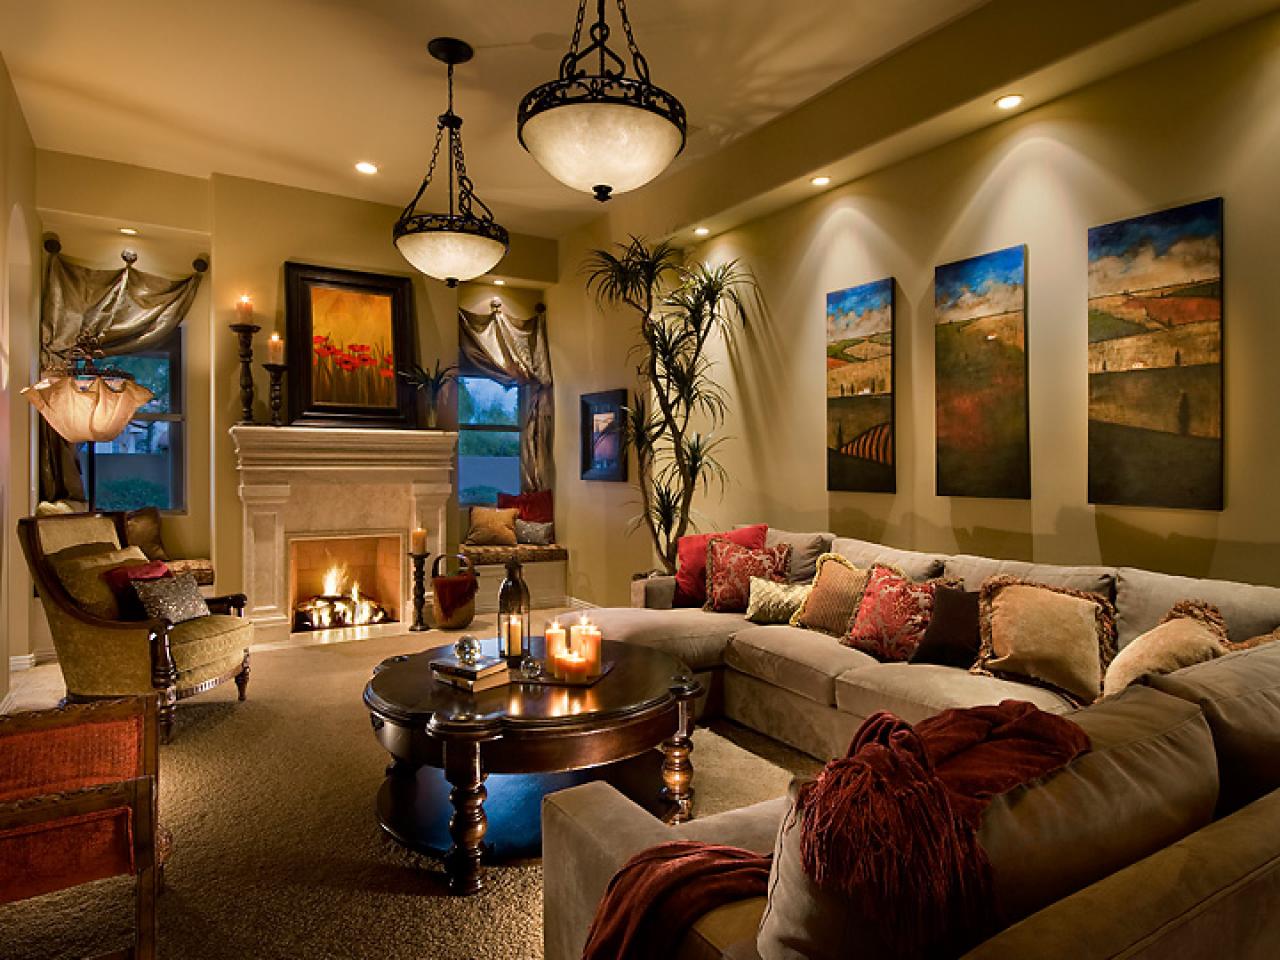 A living room showcasing stylish couches and a cozy fireplace, while avoiding the 7 deadly sins of home decorating.